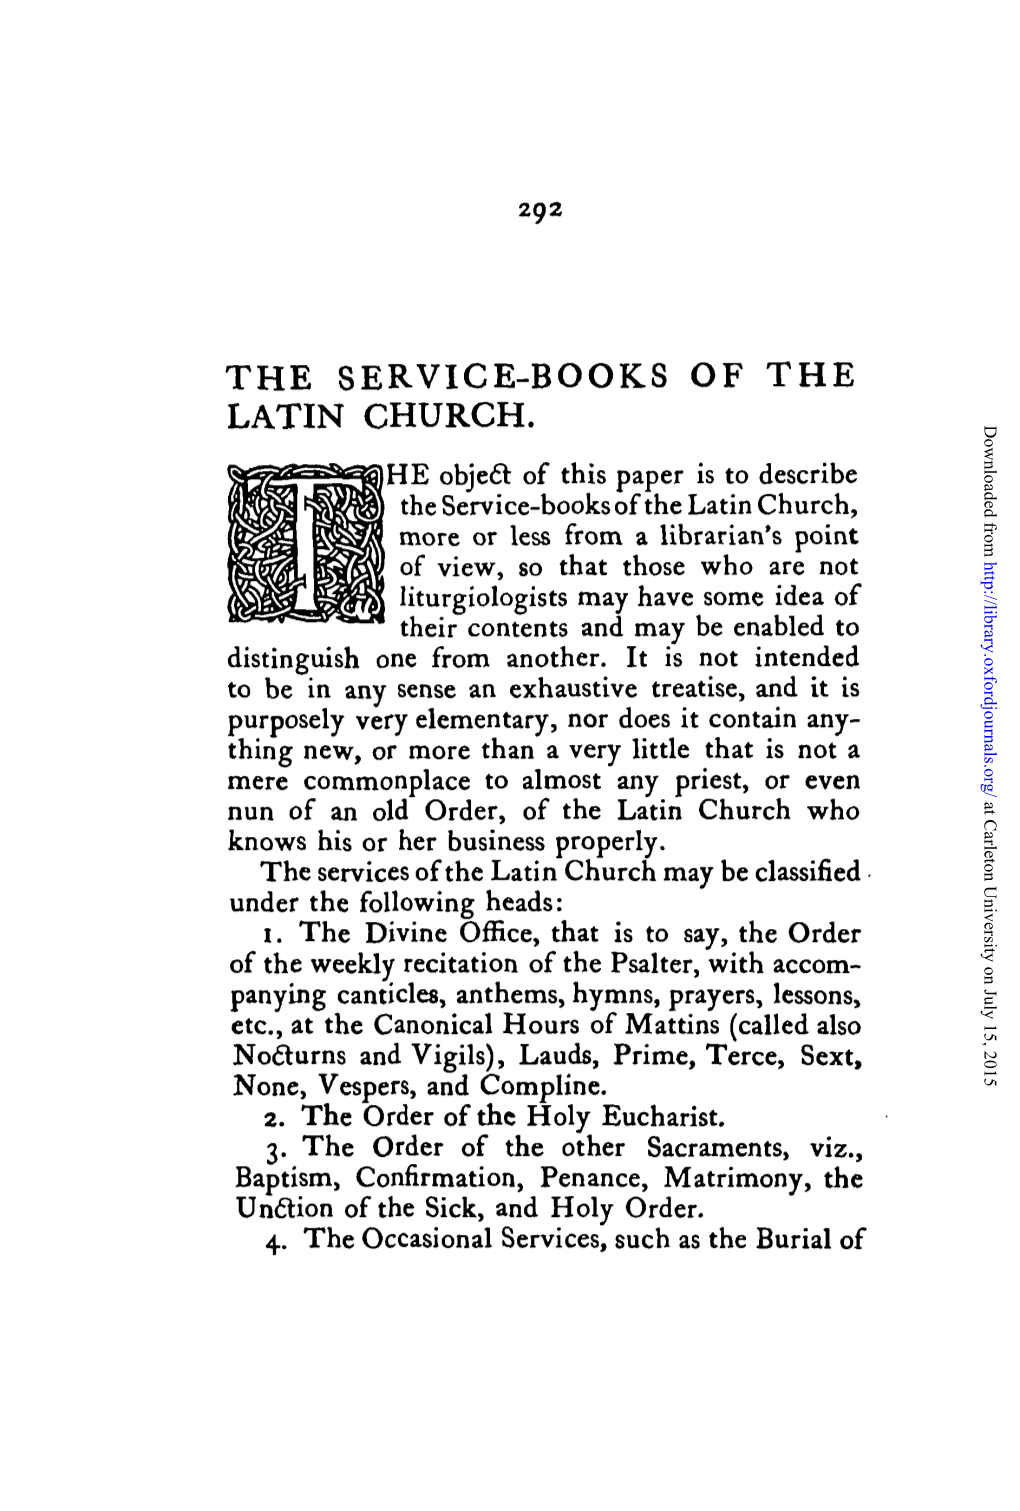 The Service-Books of the Latin Church